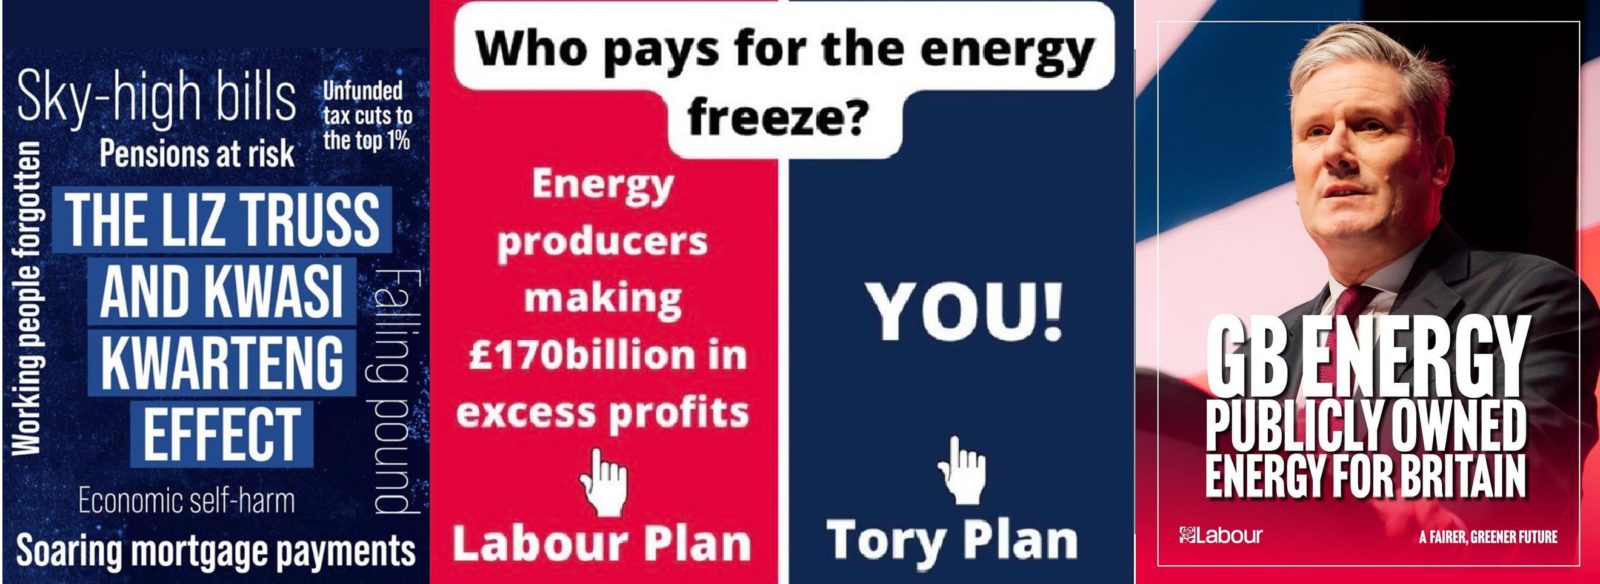 Labour - on your side - energy plan - GB Energy